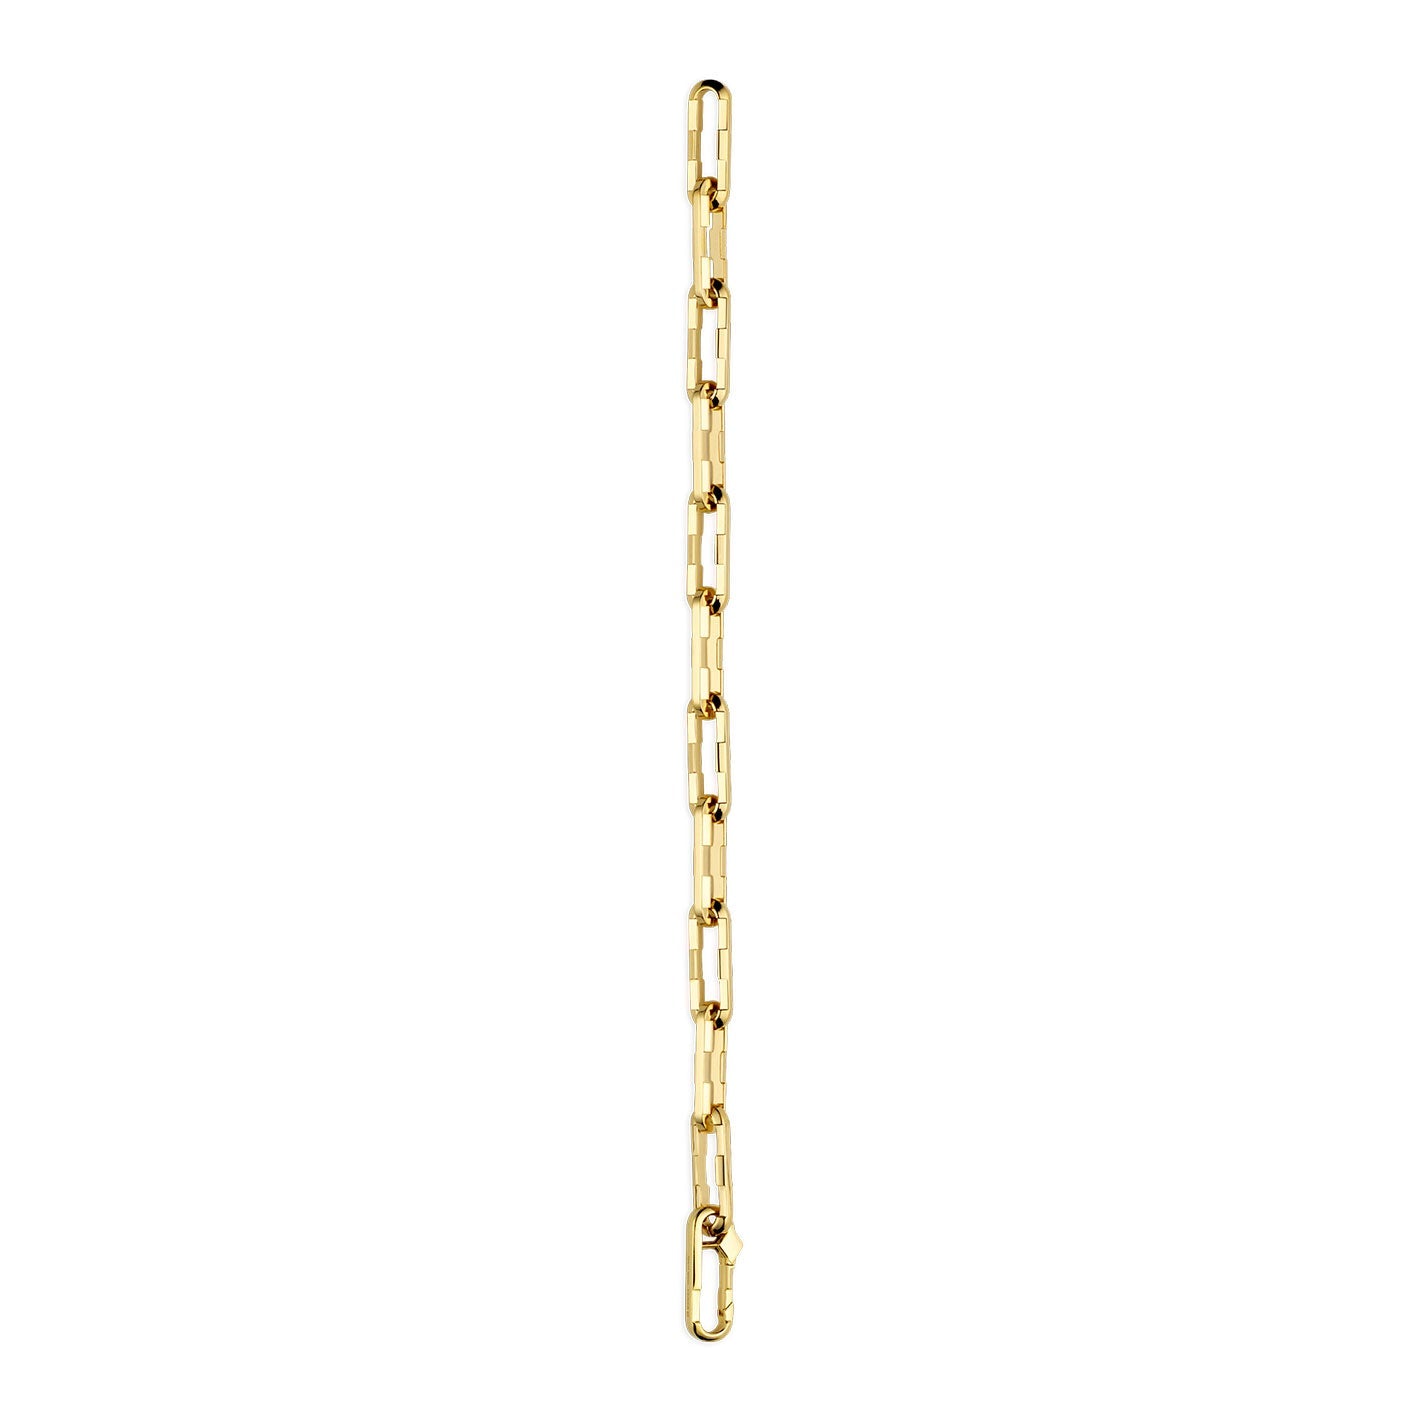 Gucci Link to Love 18K Yellow Gold Wide Chain Bracelet